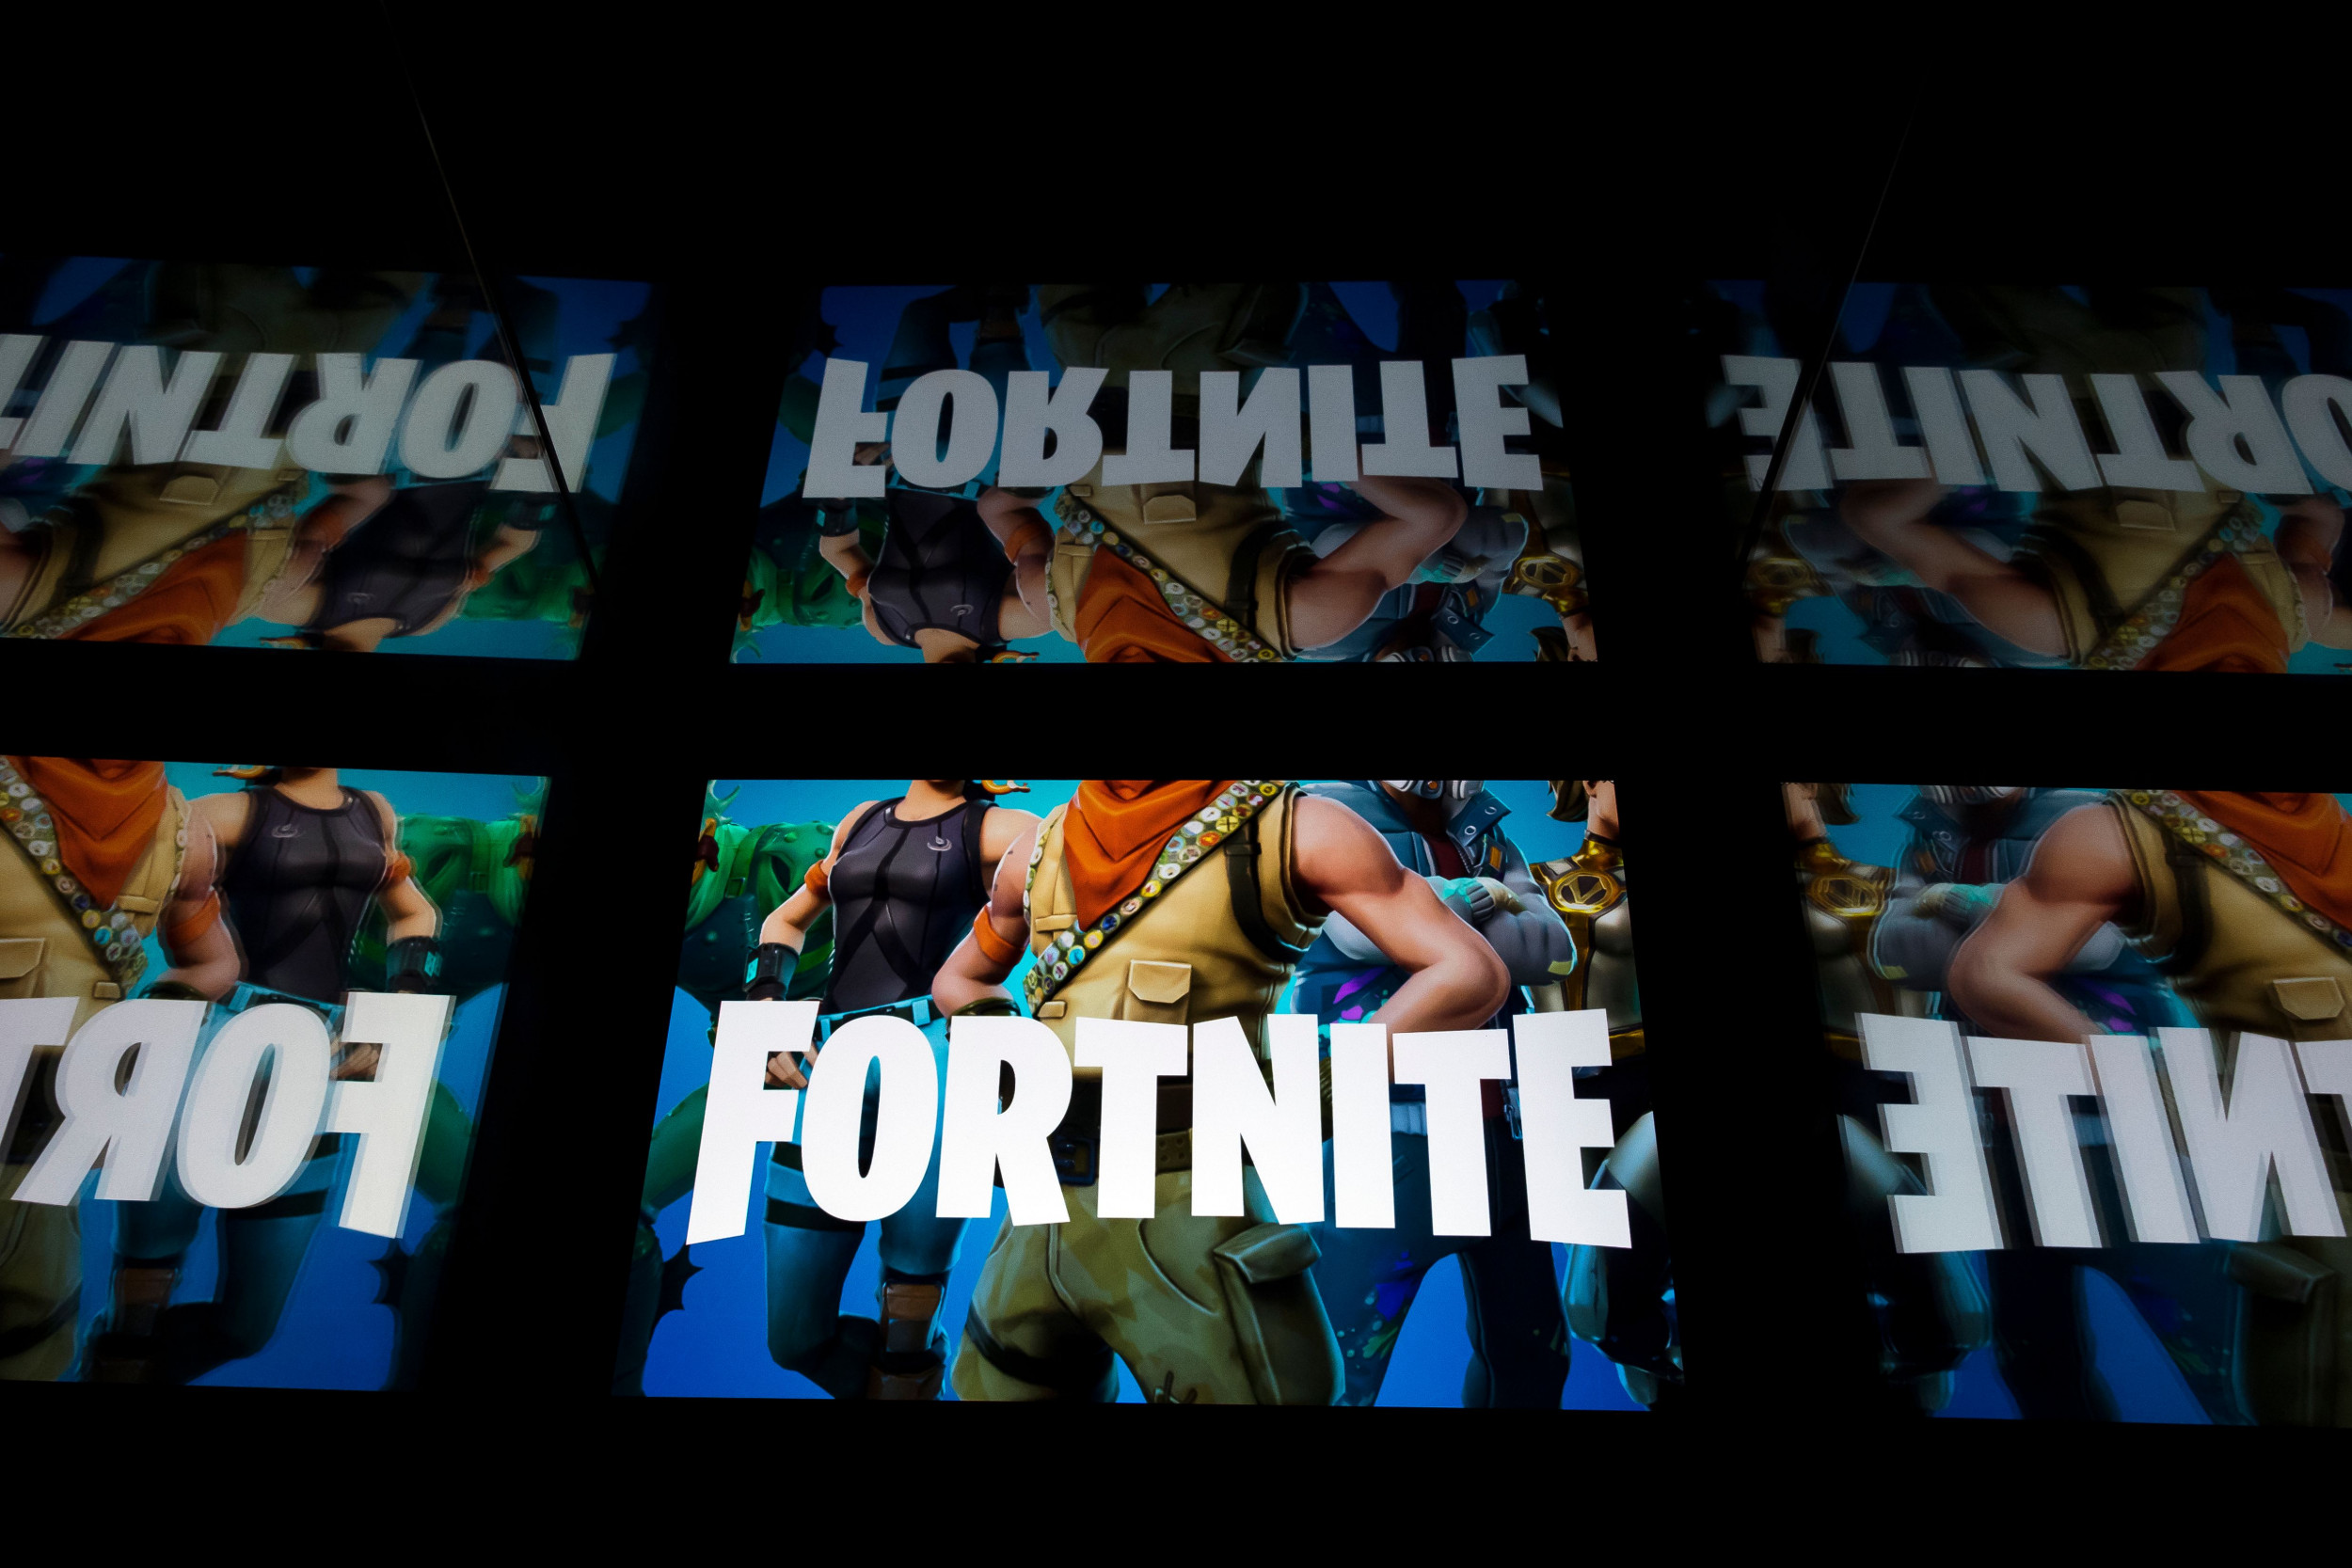 'Fortnite' Rejected From the Google Play Store, How Can ... - 2500 x 1667 jpeg 587kB